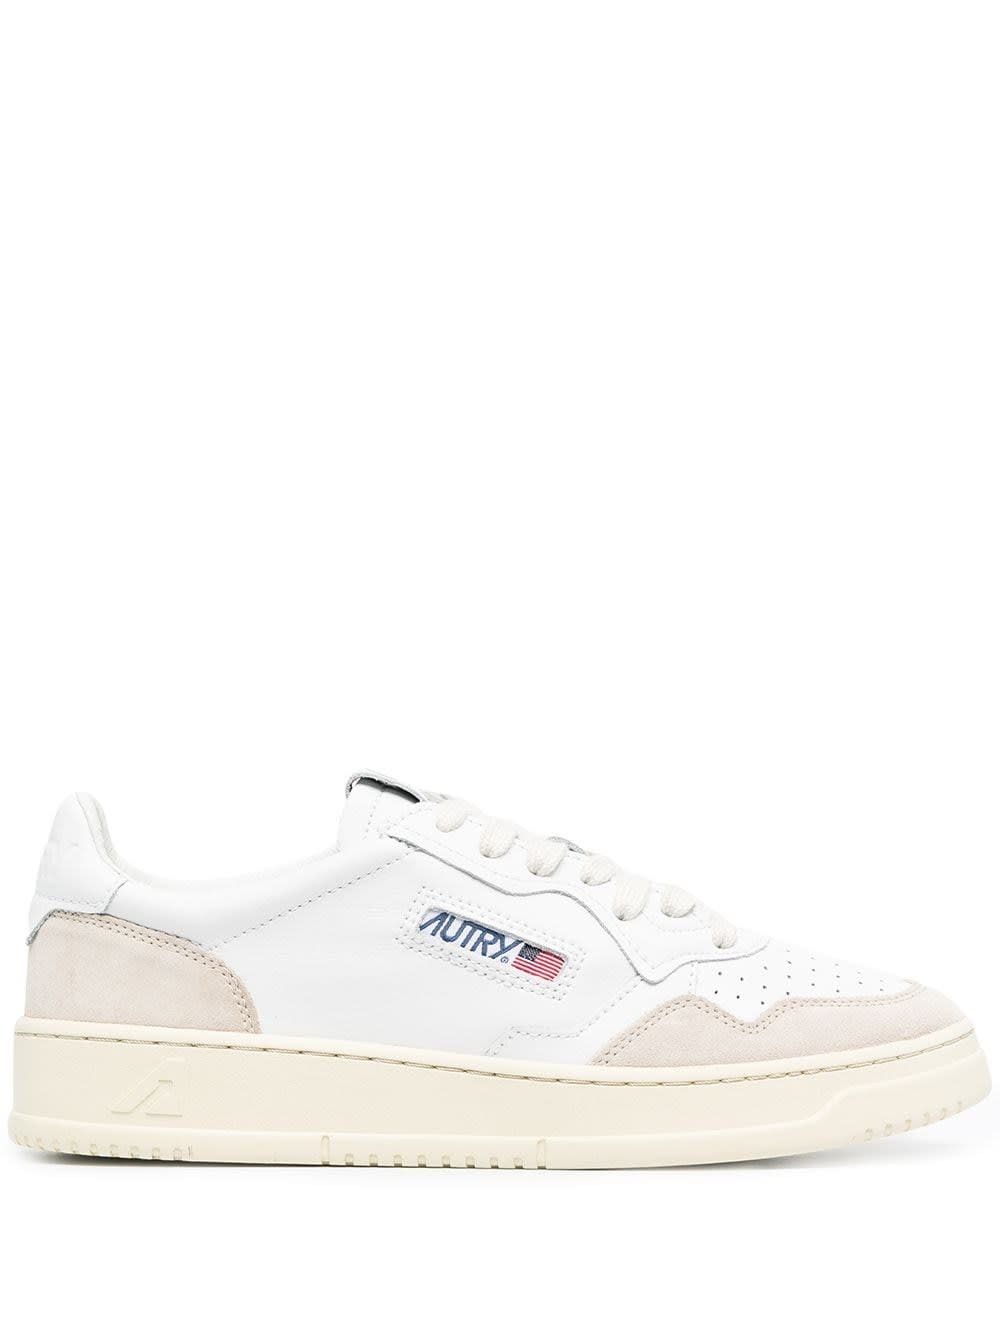 AUTRY ACTION SNEAKERS IN WHITE LEATHER,AULMLS33